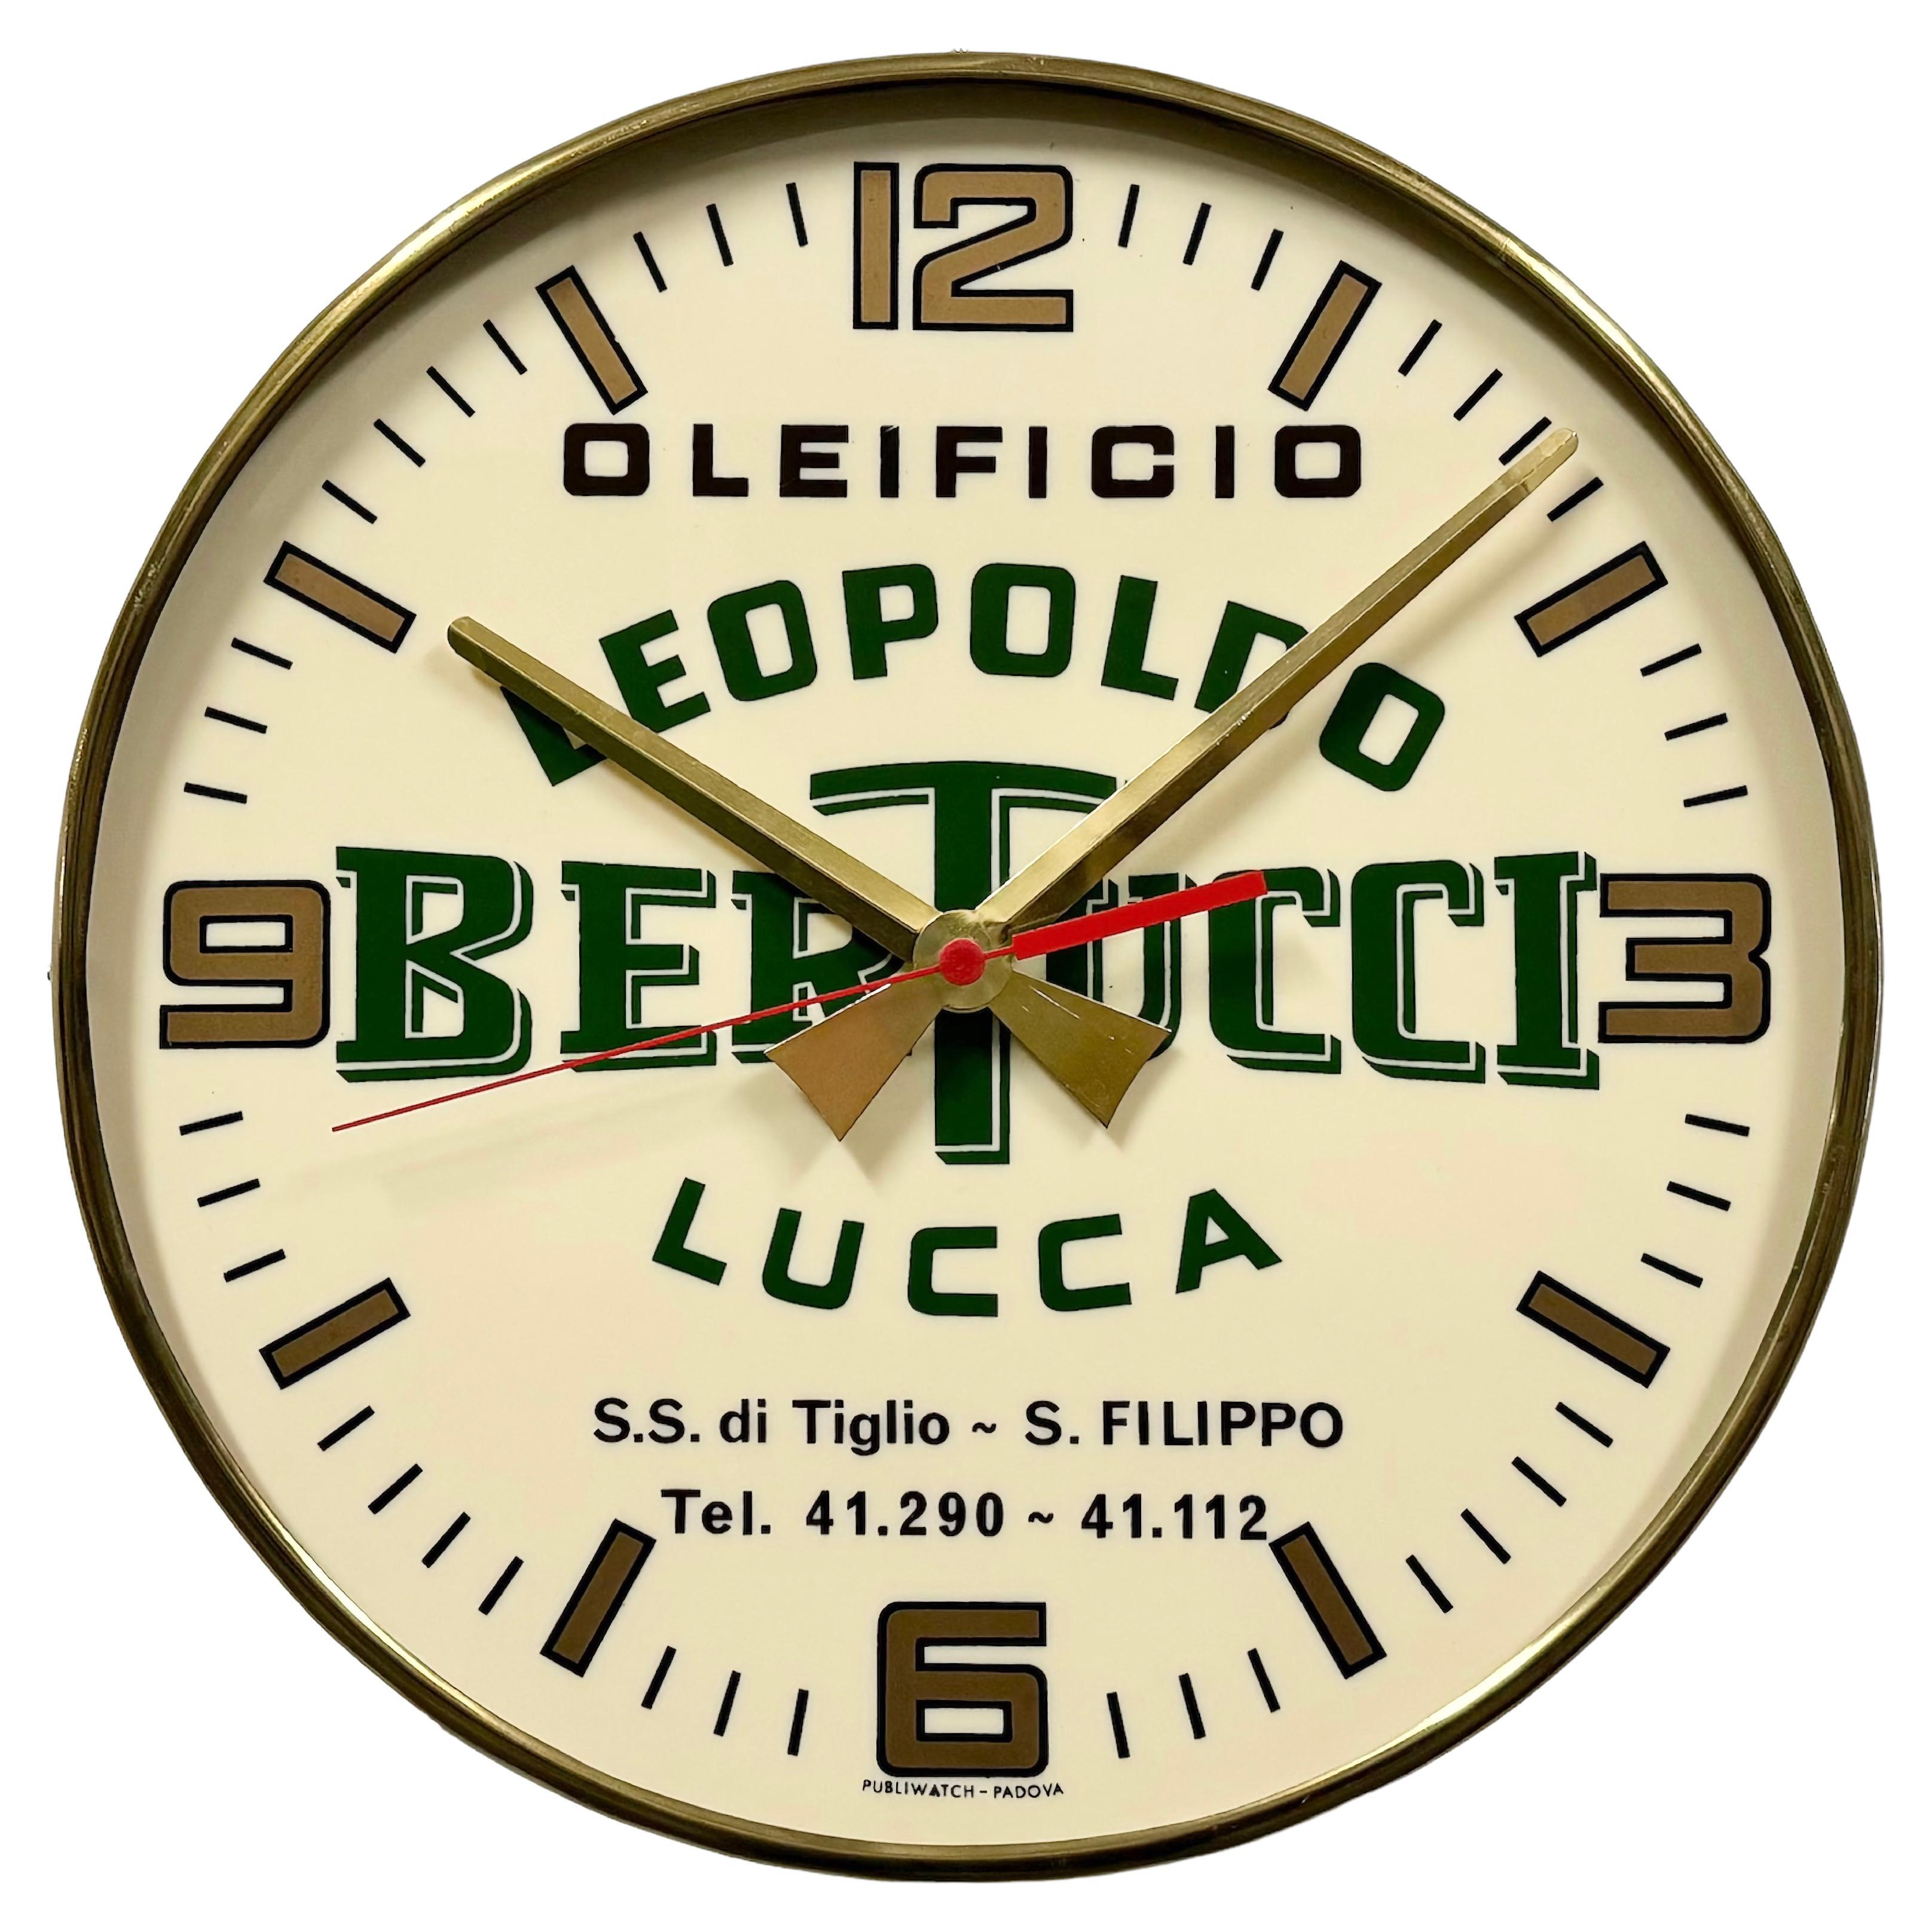 Vintage Italian Advertising Wall Clock, 1970s For Sale